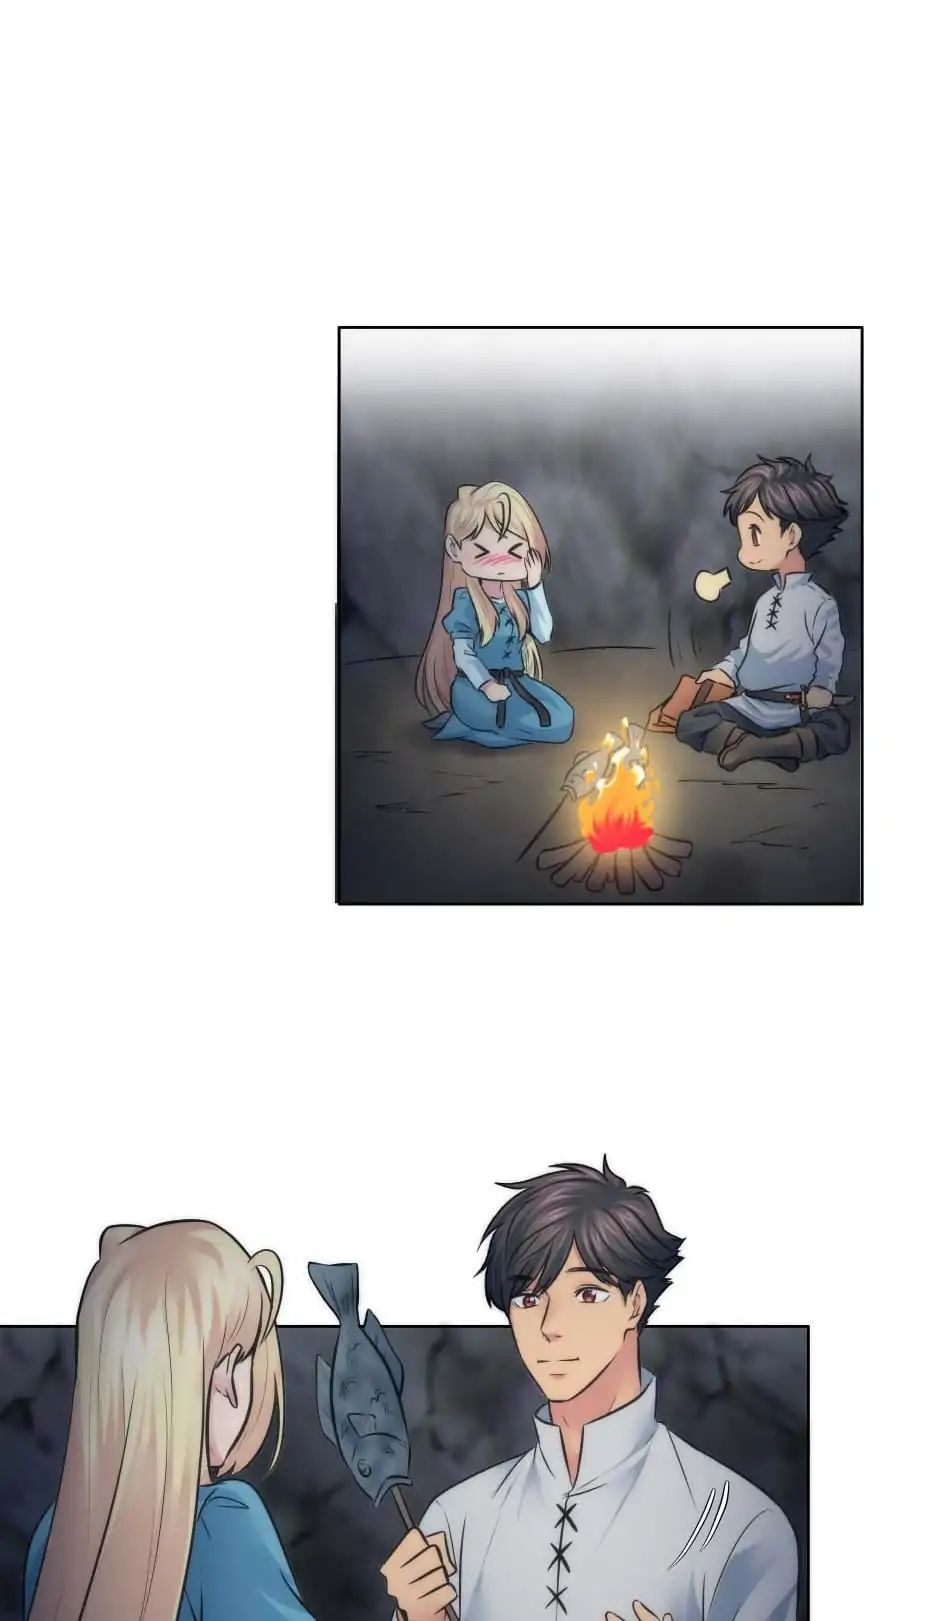 The Dragon Prince’s Bride chapter 24